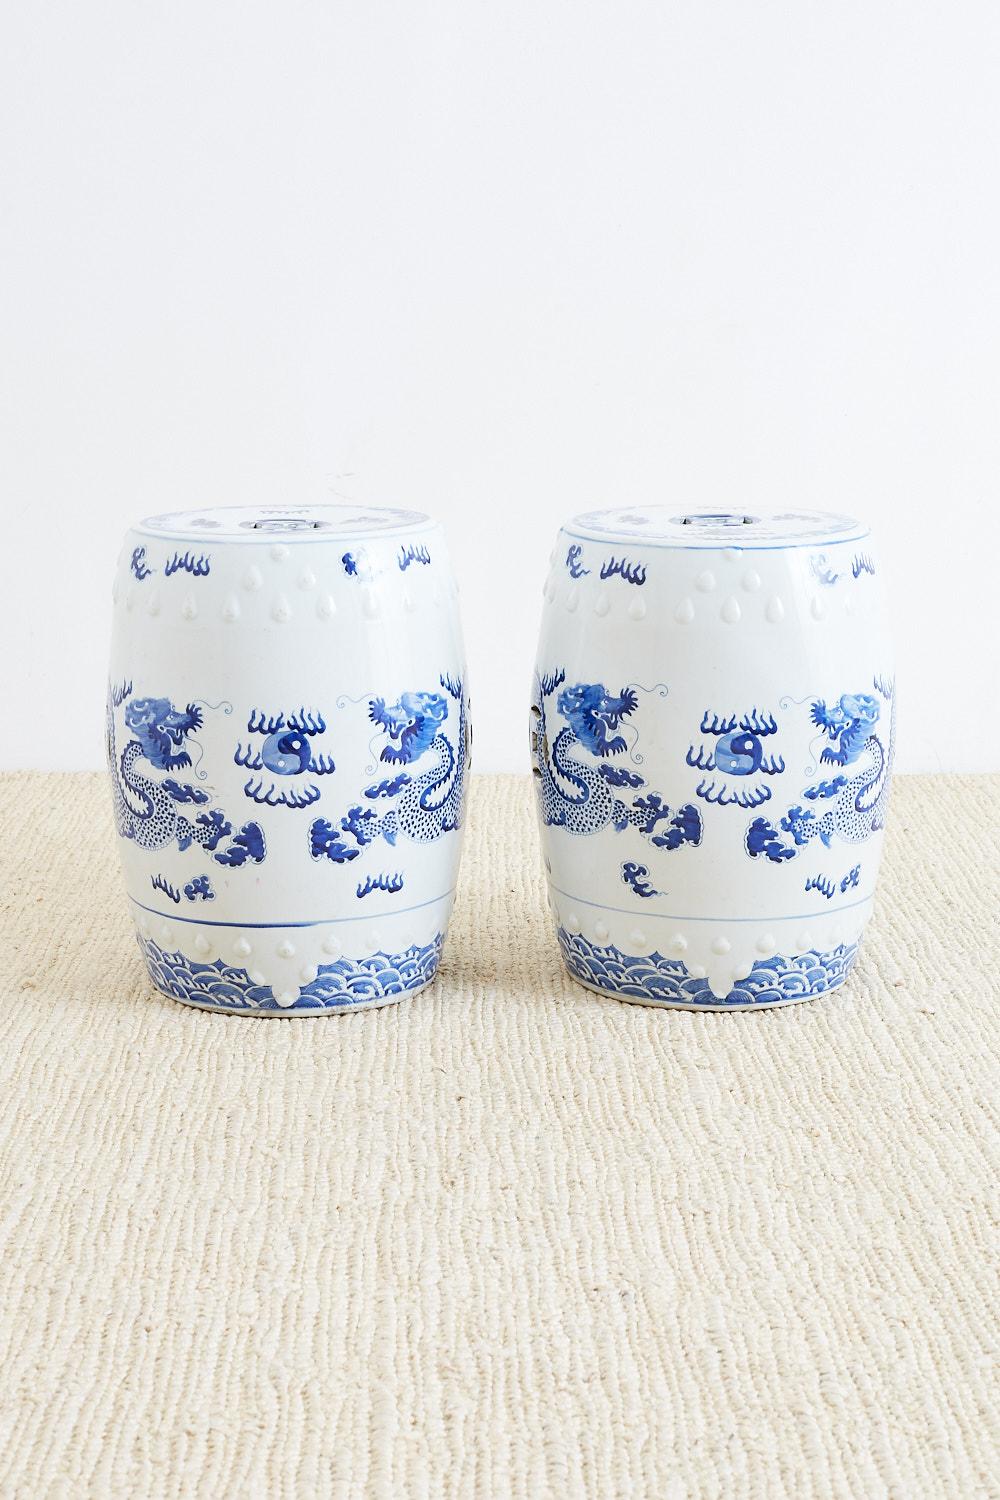 Pair of hand-painted Chinese blue and white ceramic garden stools or drink tables featuring flying dragons. Large cylindrical drum form stools with waves painted on bottom and a cloud design around the dragons chasing a flaming pearl of wisdom.